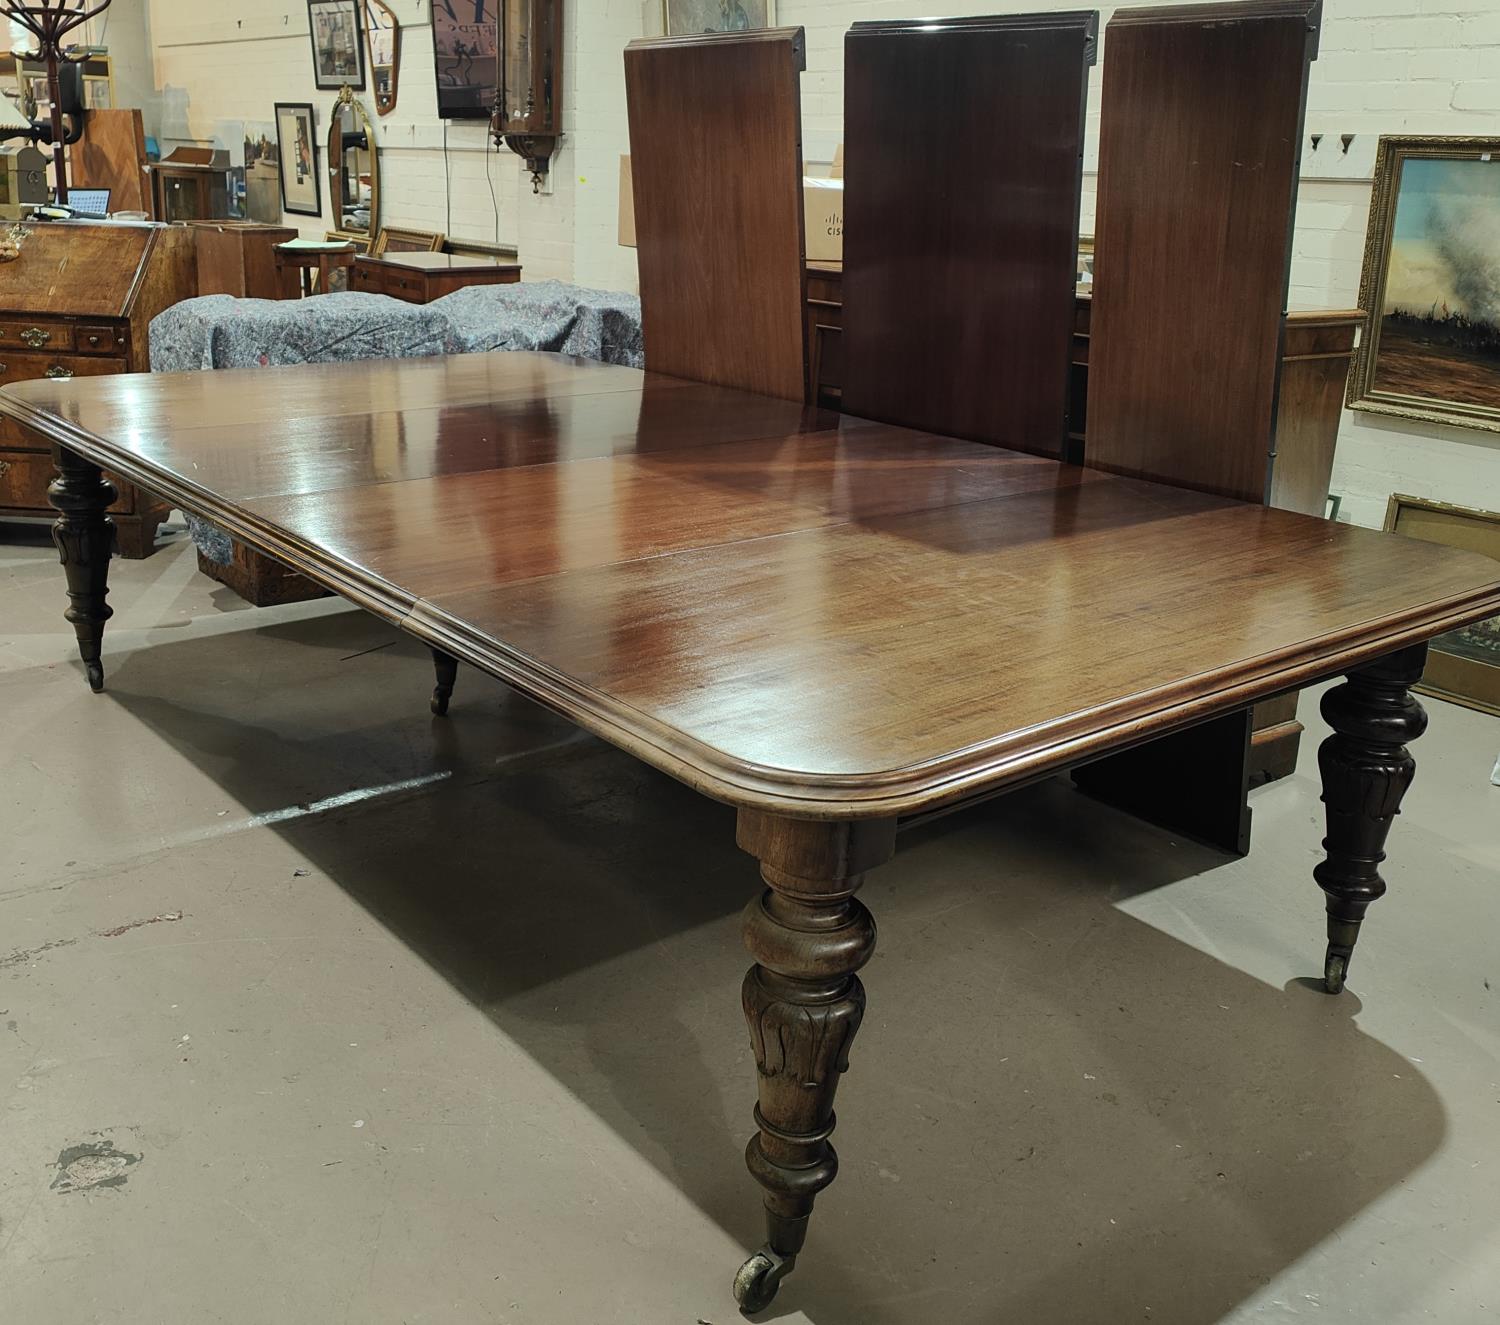 Banqueting Dining Table: A mid 19th century large and impressive rounded rectangular mahogany wind